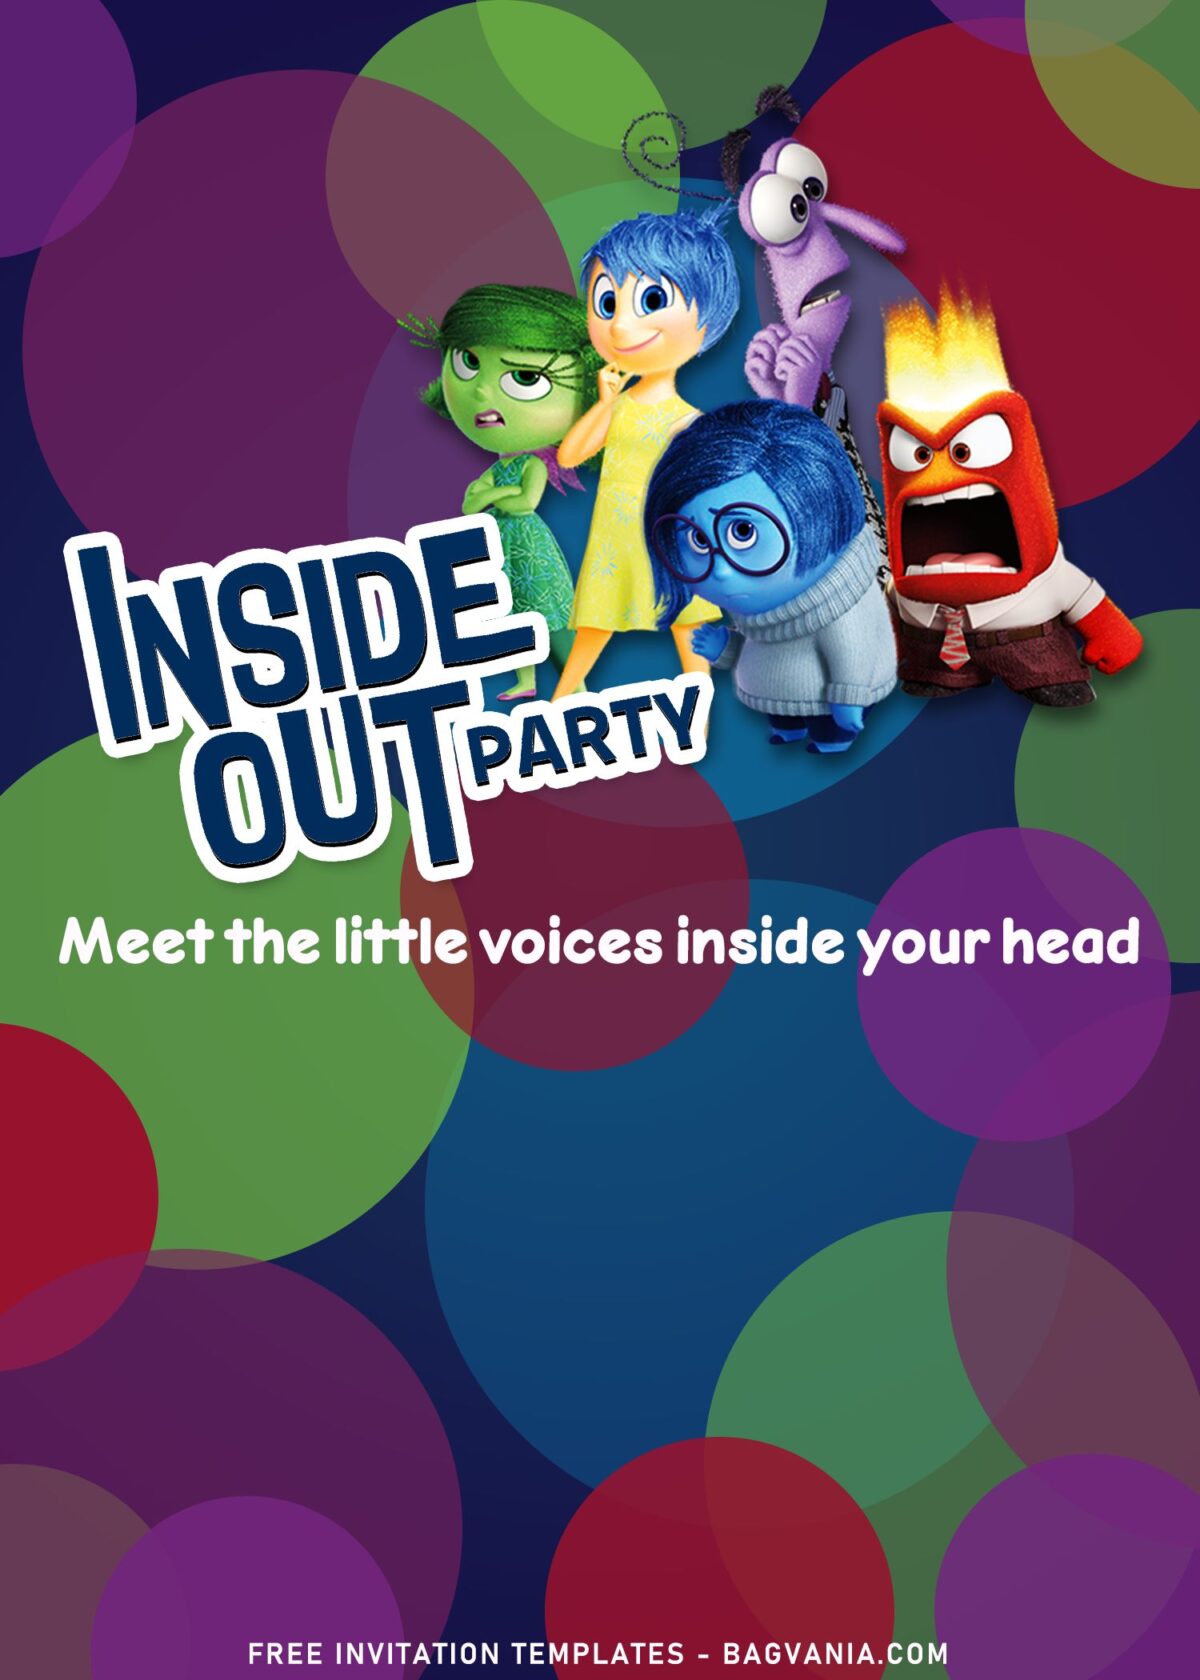 10+ Amusing Disney Inside Out Birthday Invitation Templates with Disgust